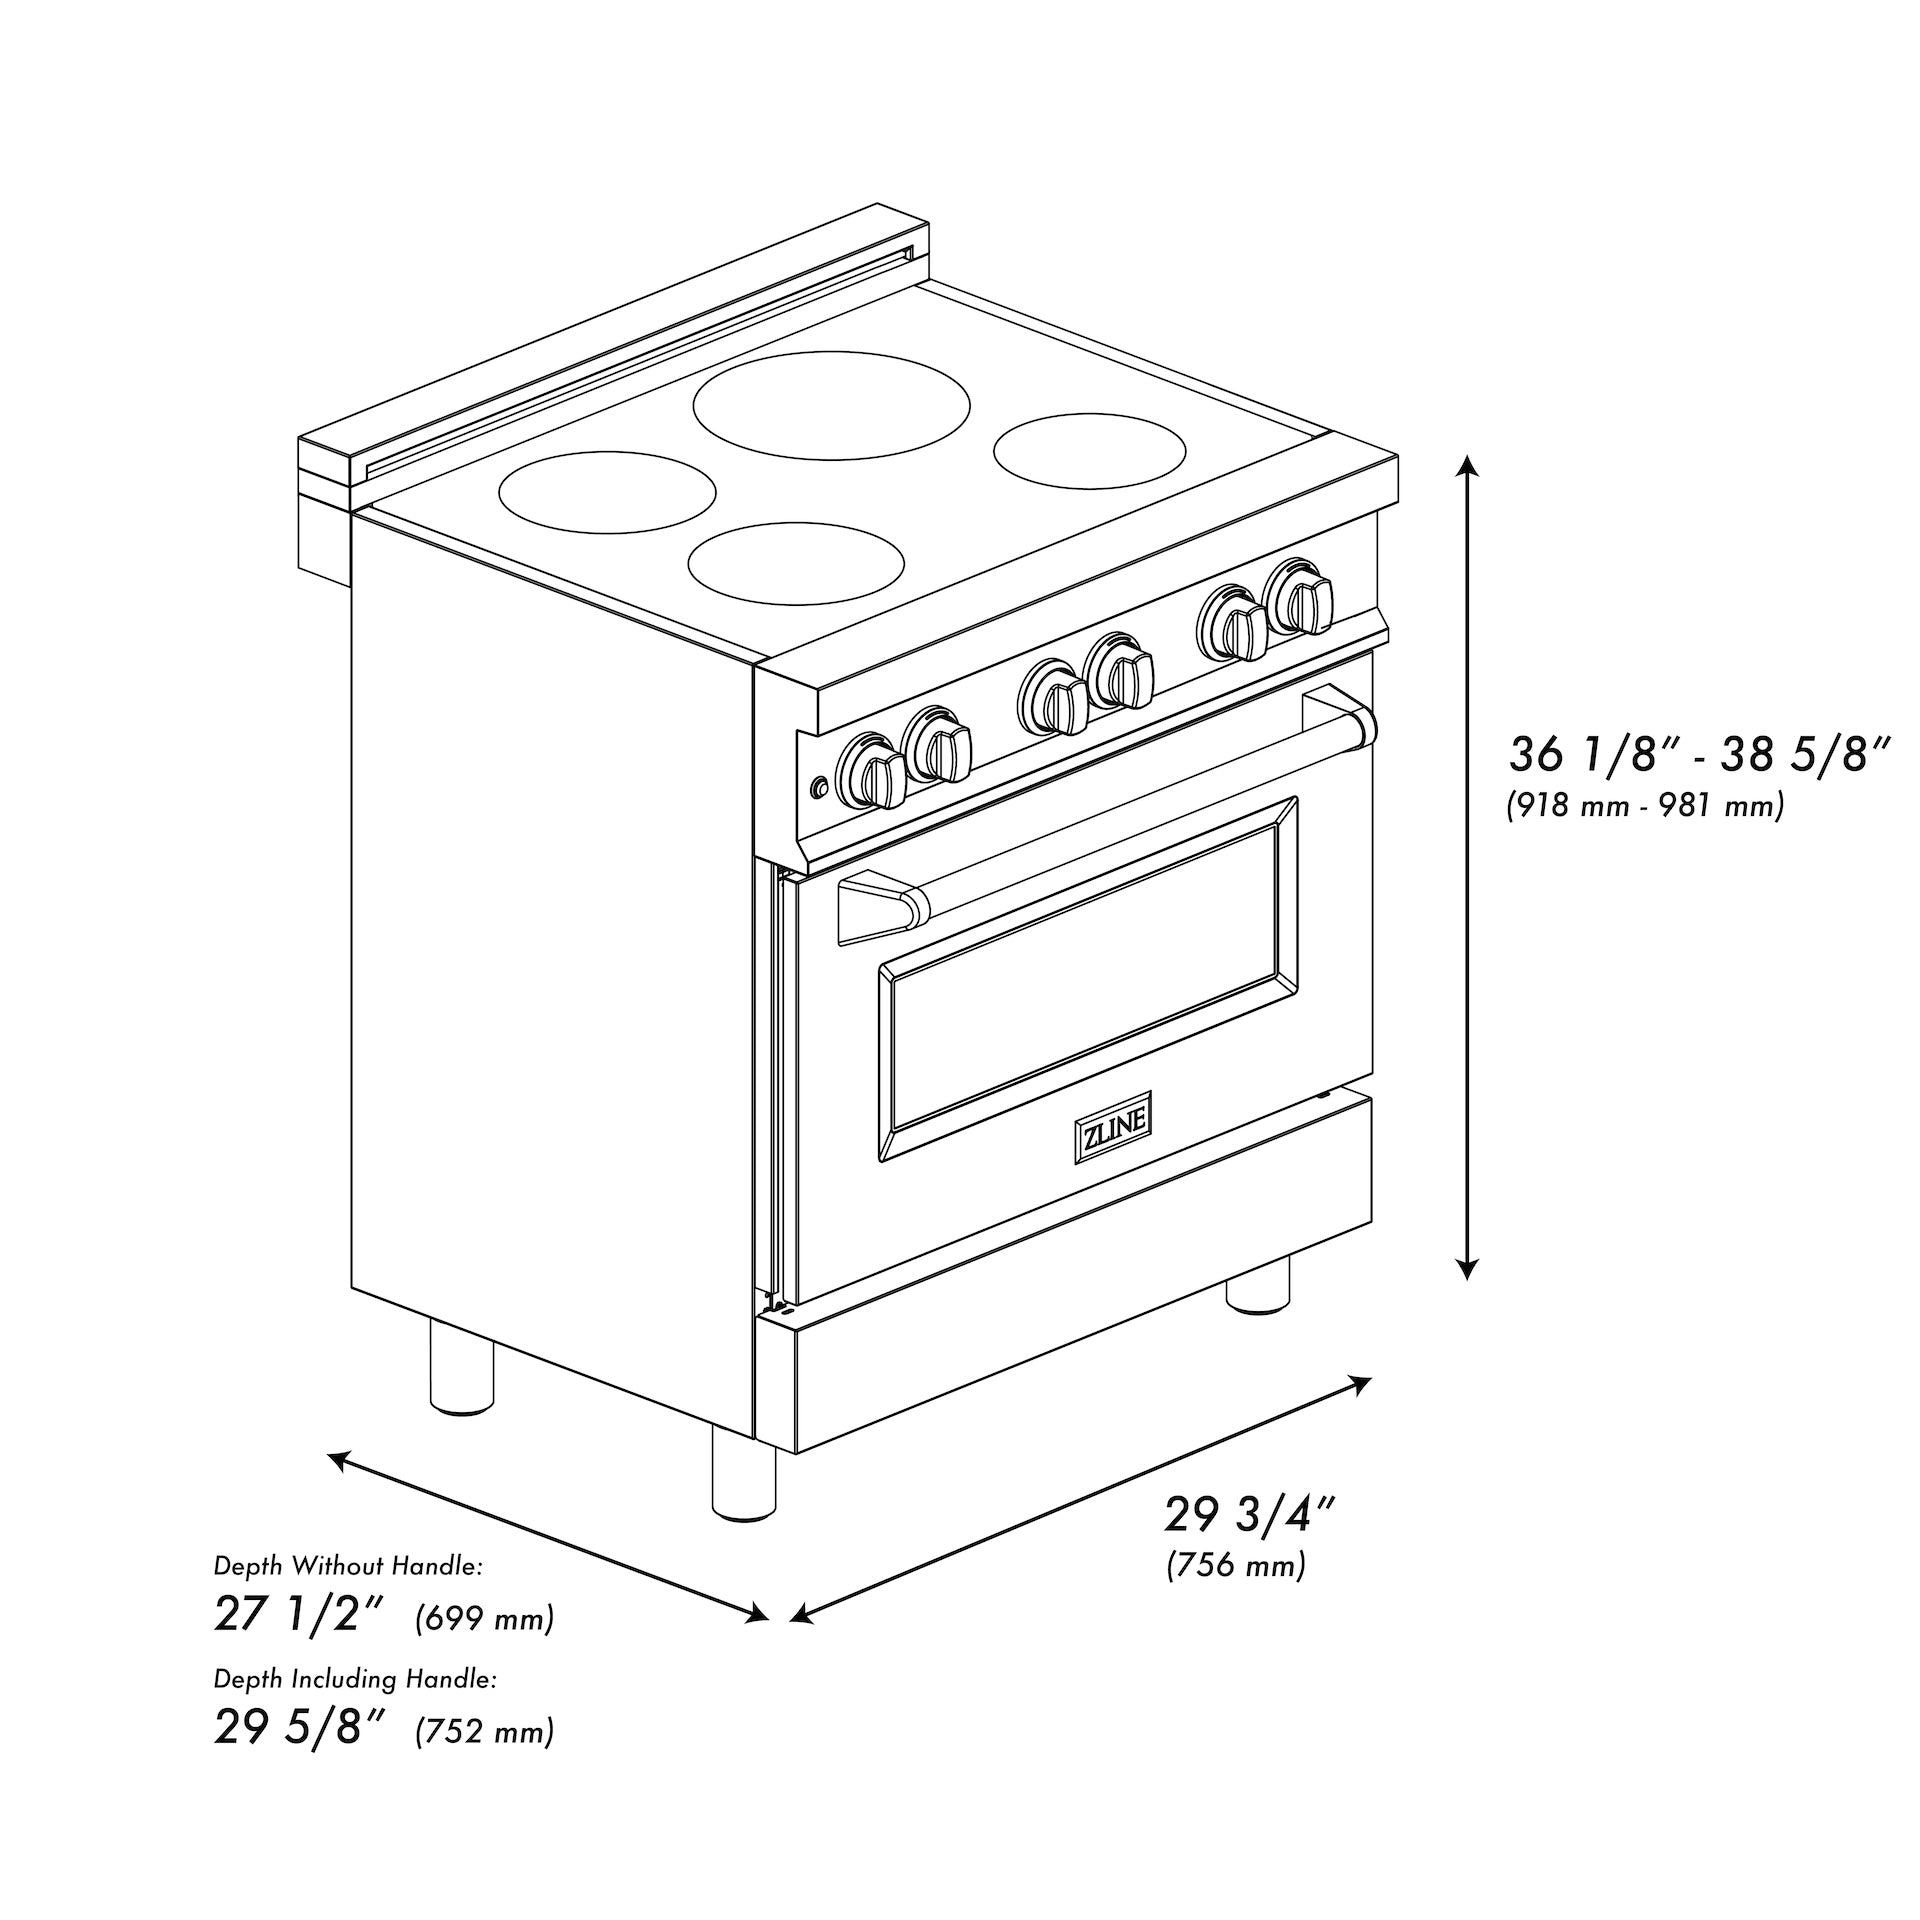 ZLINE 30" 4.0 cu. ft. Induction Range with a 4 Element Stove and Electric Oven in Black Matte (RAIND-BLM-30)